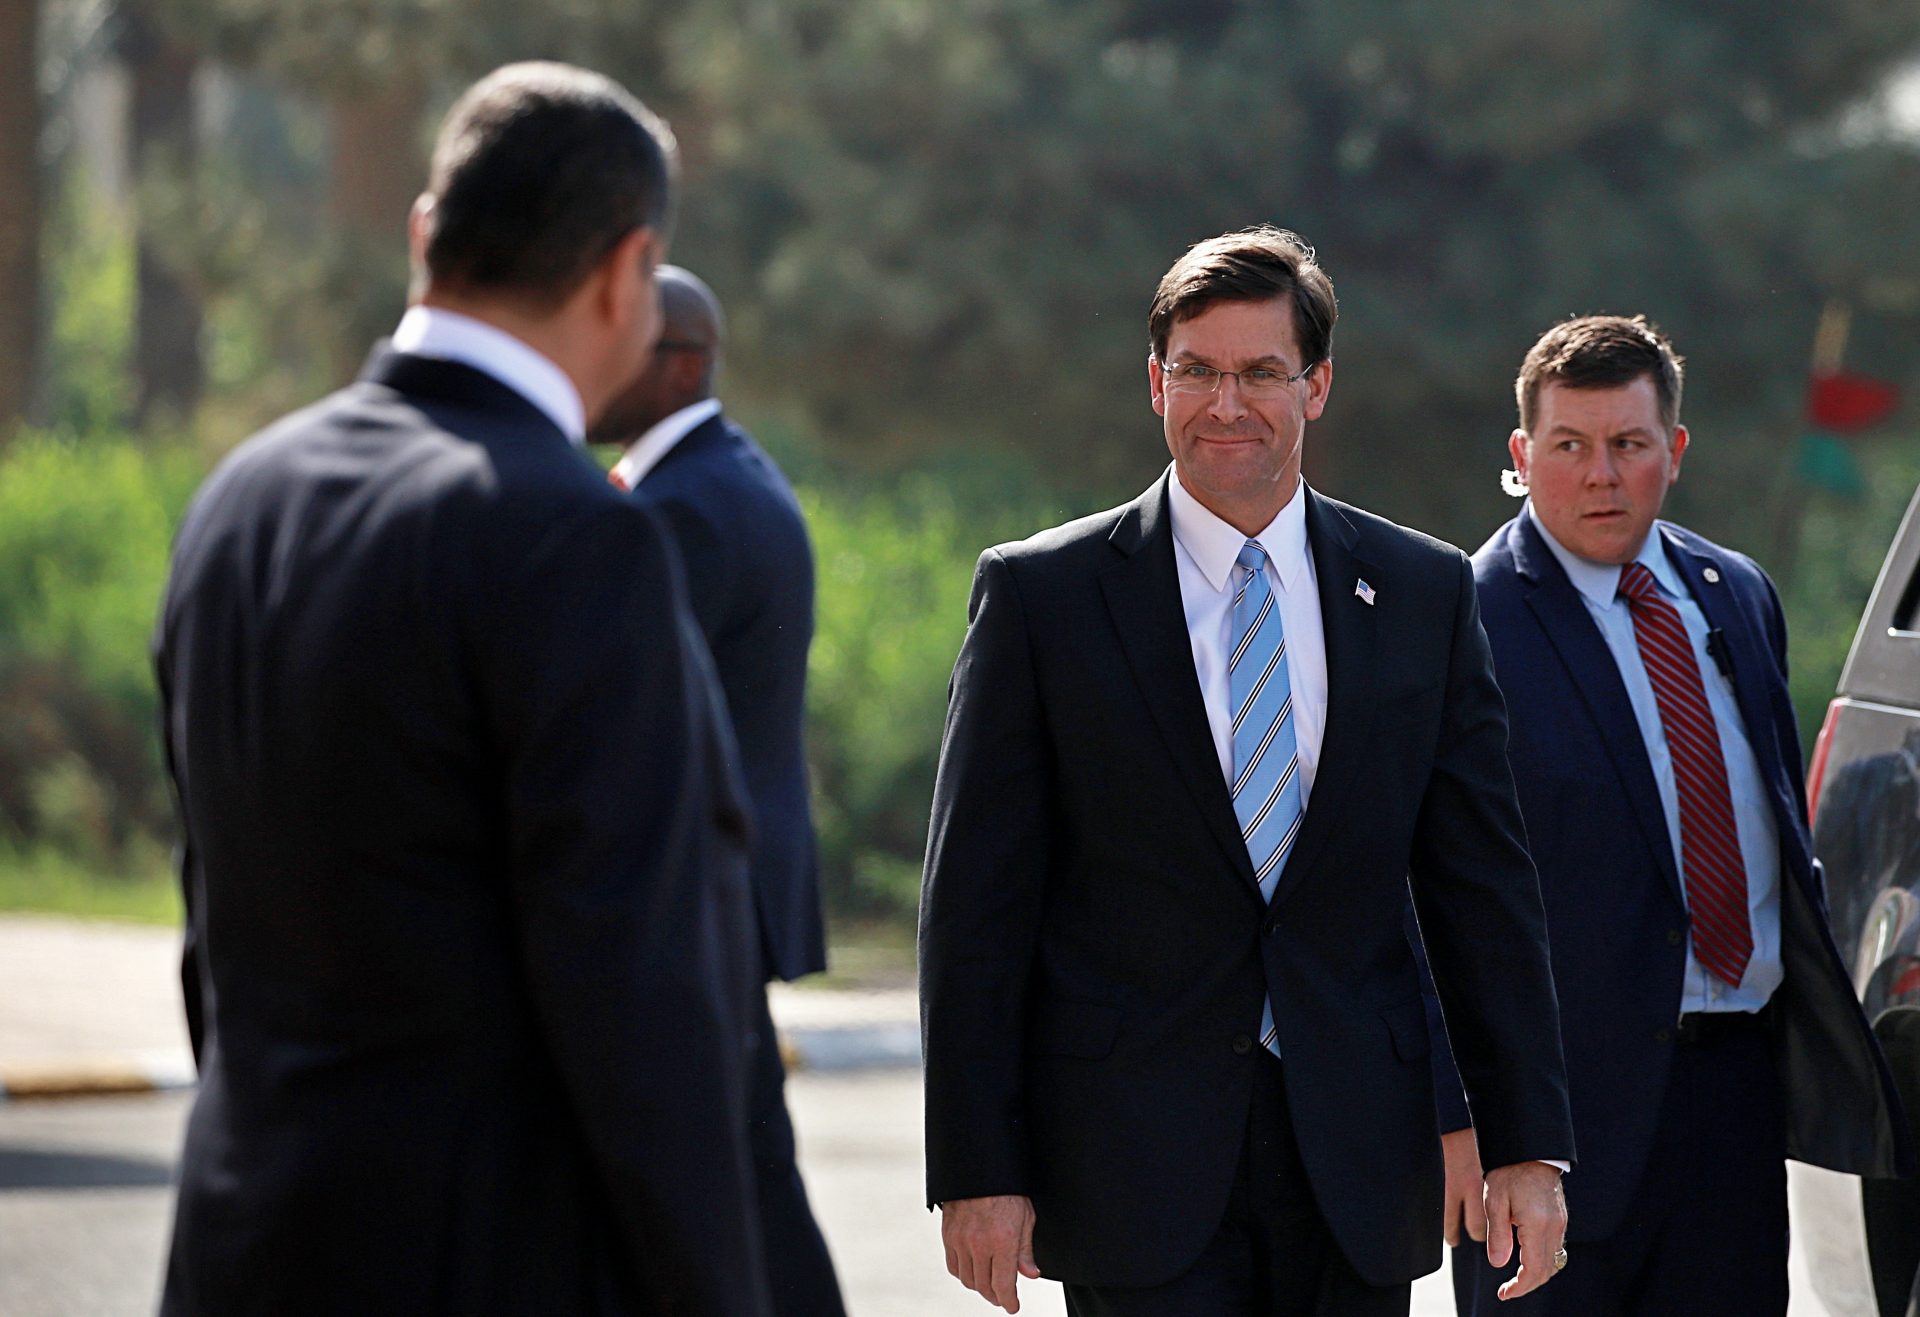 Iraqi Defense Minister Najah al-Shammari, left, prepares to welcome the visiting U.S. Defense Secretary Mark Esper, center right, at the Ministry of Defense, Baghdad, Iraq, Wednesday, Oct. 23, 2019. Esper has arrived in Baghdad on a visit aimed at working out details about the future of American troops that are withdrawing from Syria to neighboring Iraq.